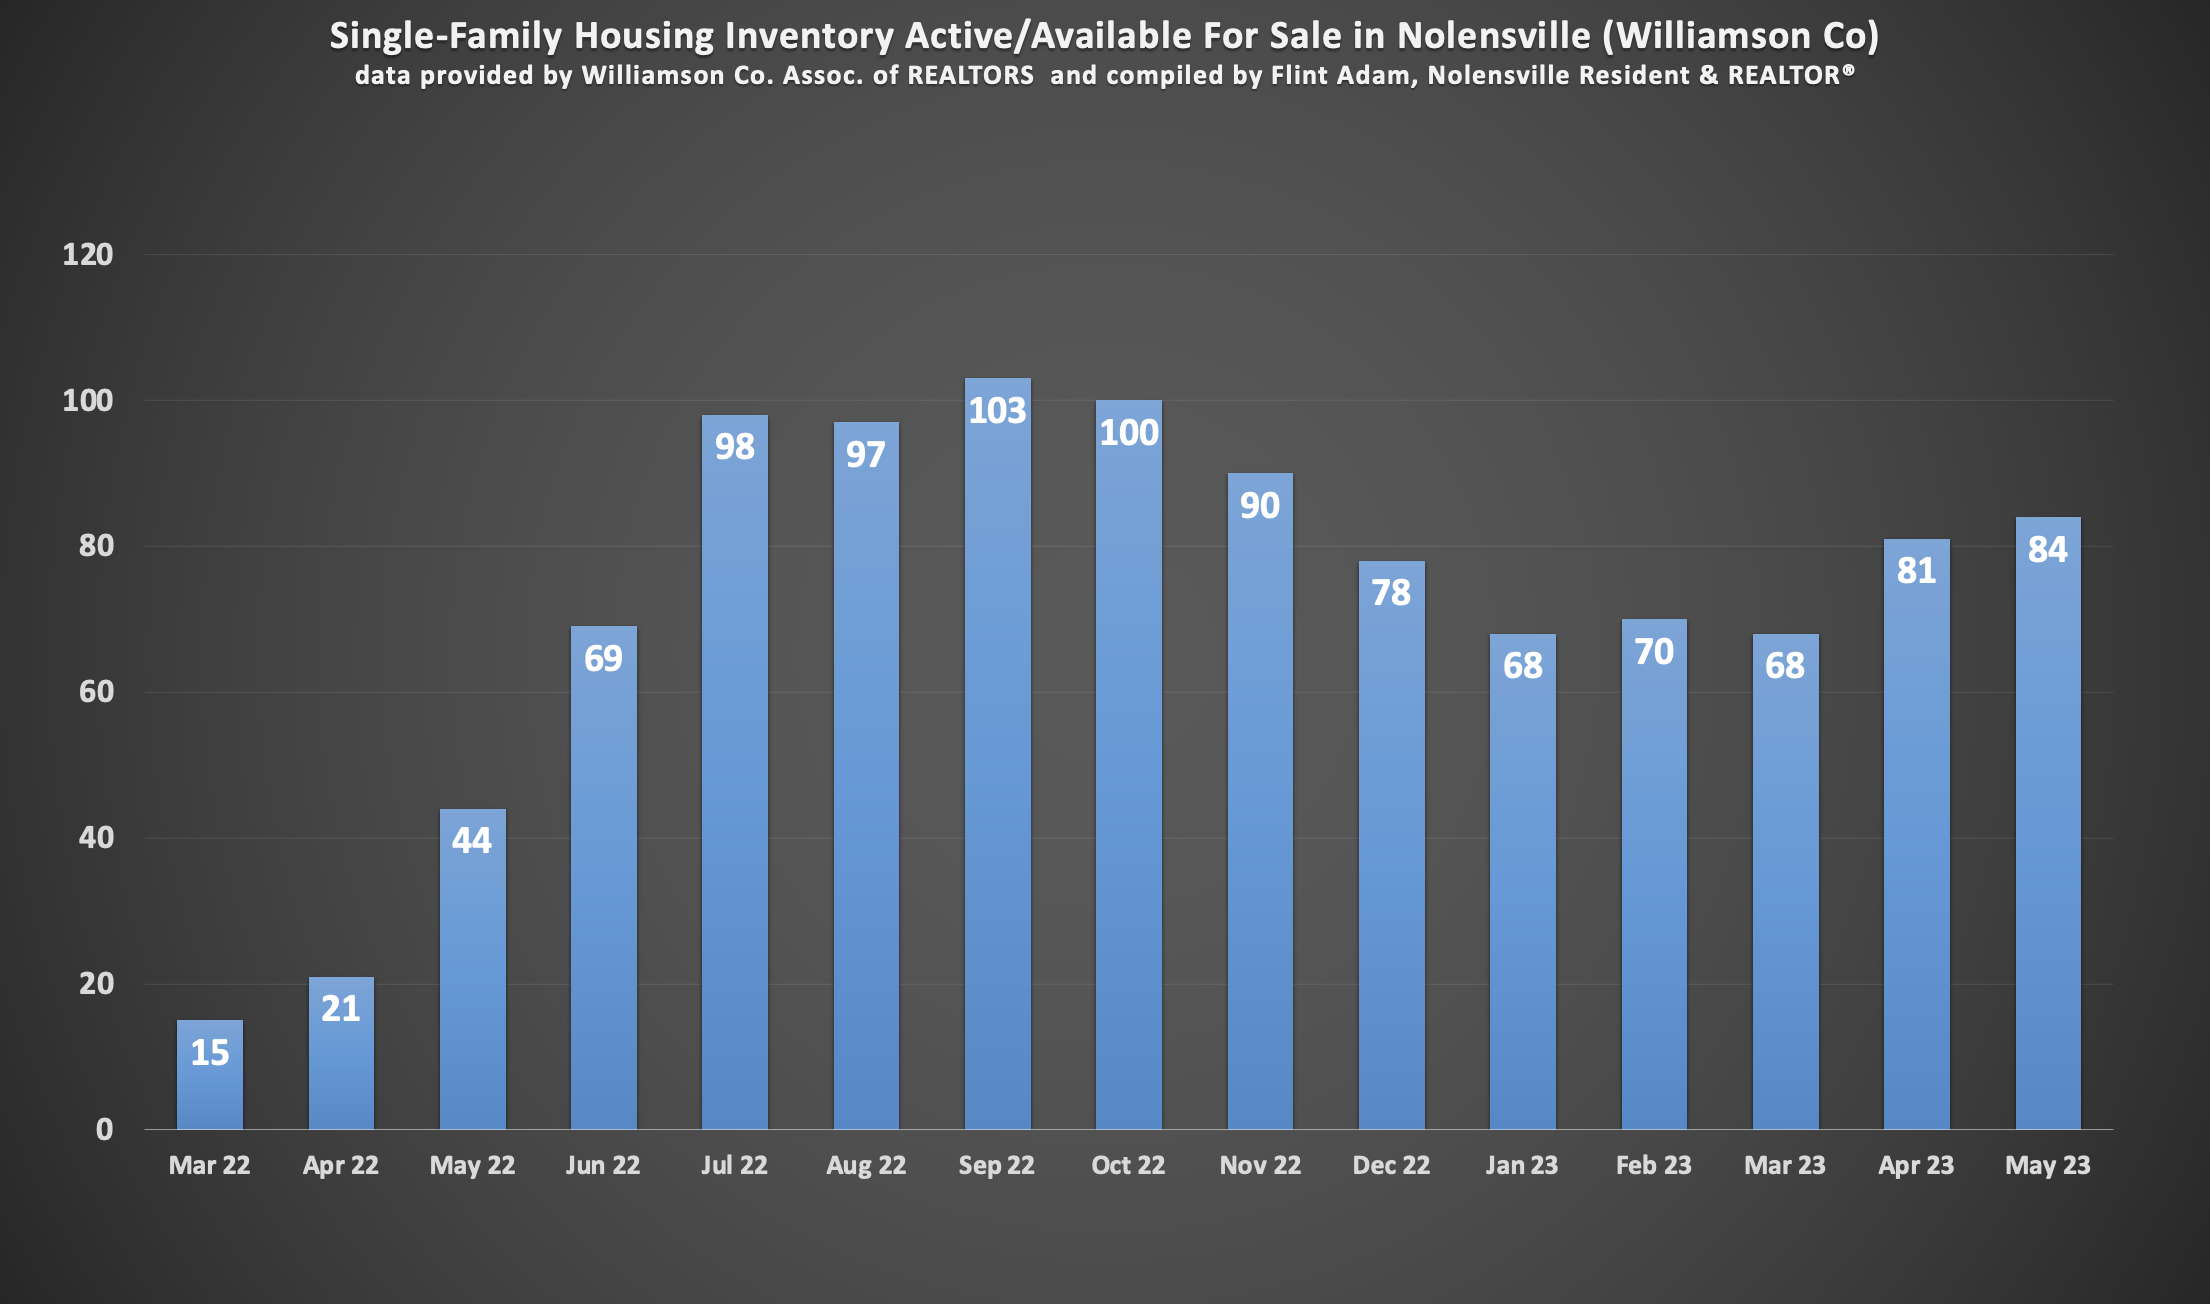 Single-Family Housing Inventory Active/Available For Sale in Nolensville (Williamson Co) data provided by Williamson Co. Assoc. of REALTORS and compiled by Flint Adam, Nolensville Resident & REALTOR®